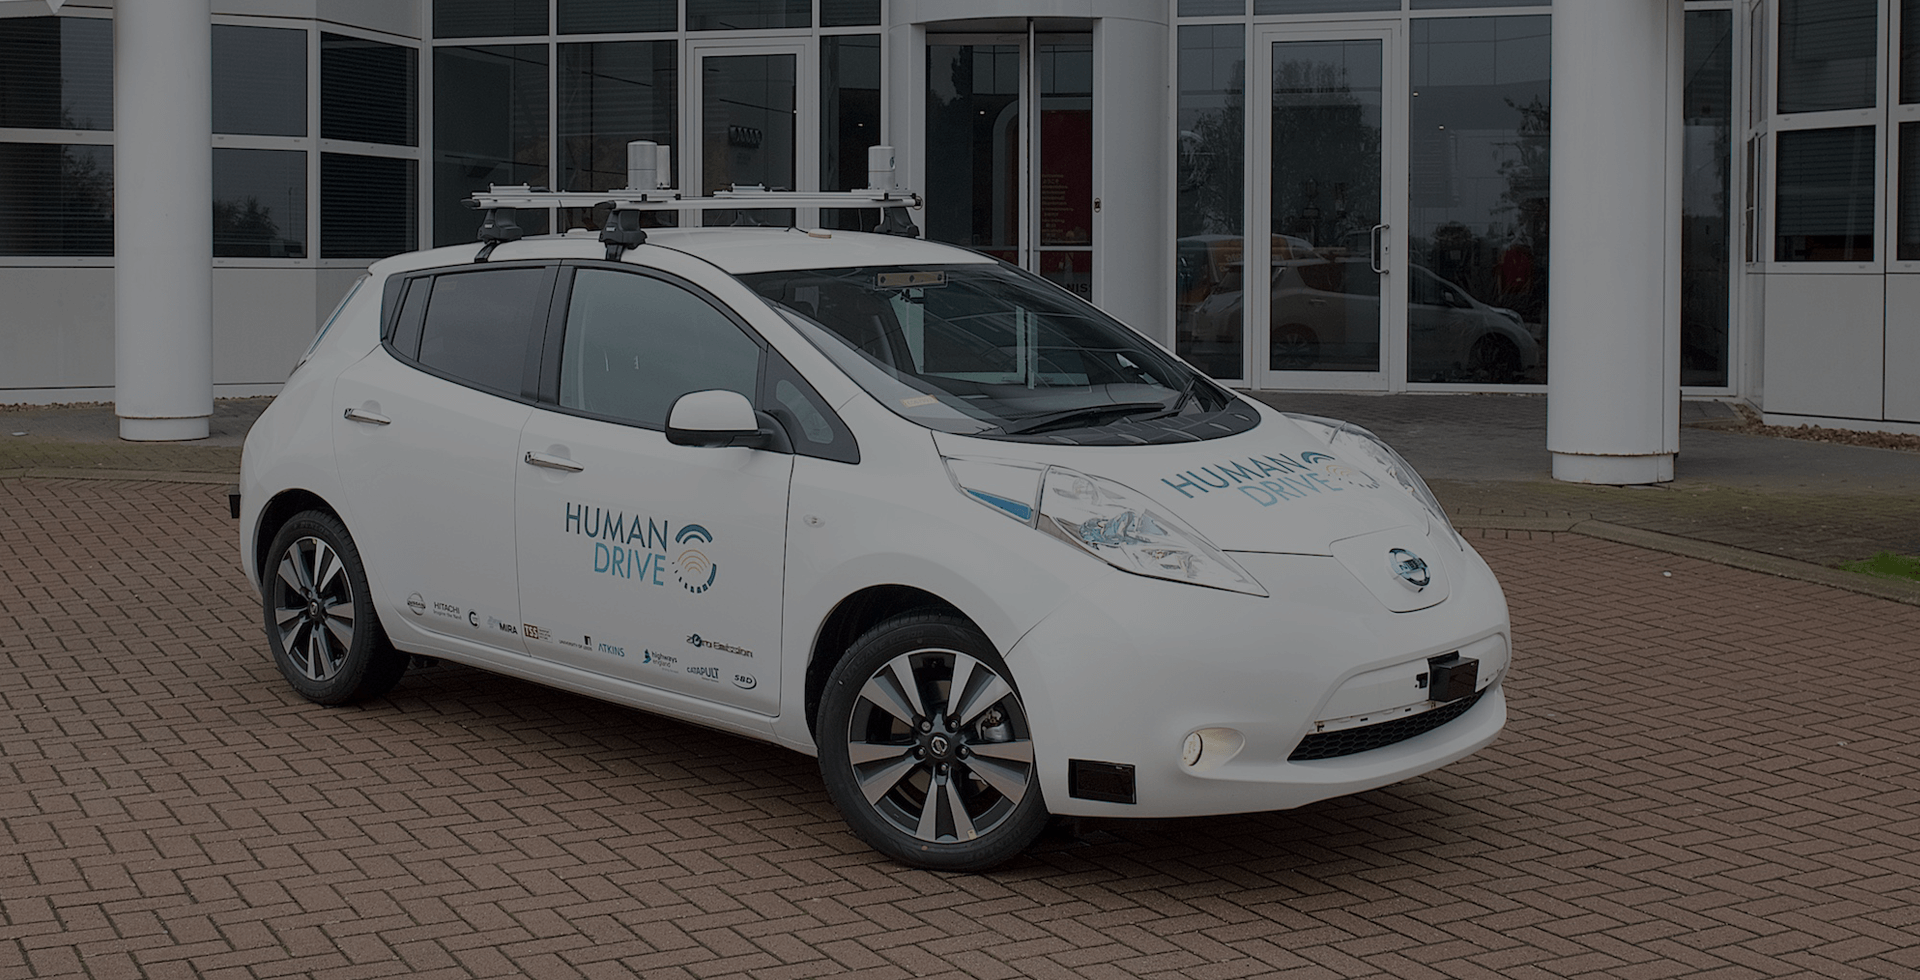 Autonomous Car Project seeks to emulate natural human driving in UK driving environment. photo